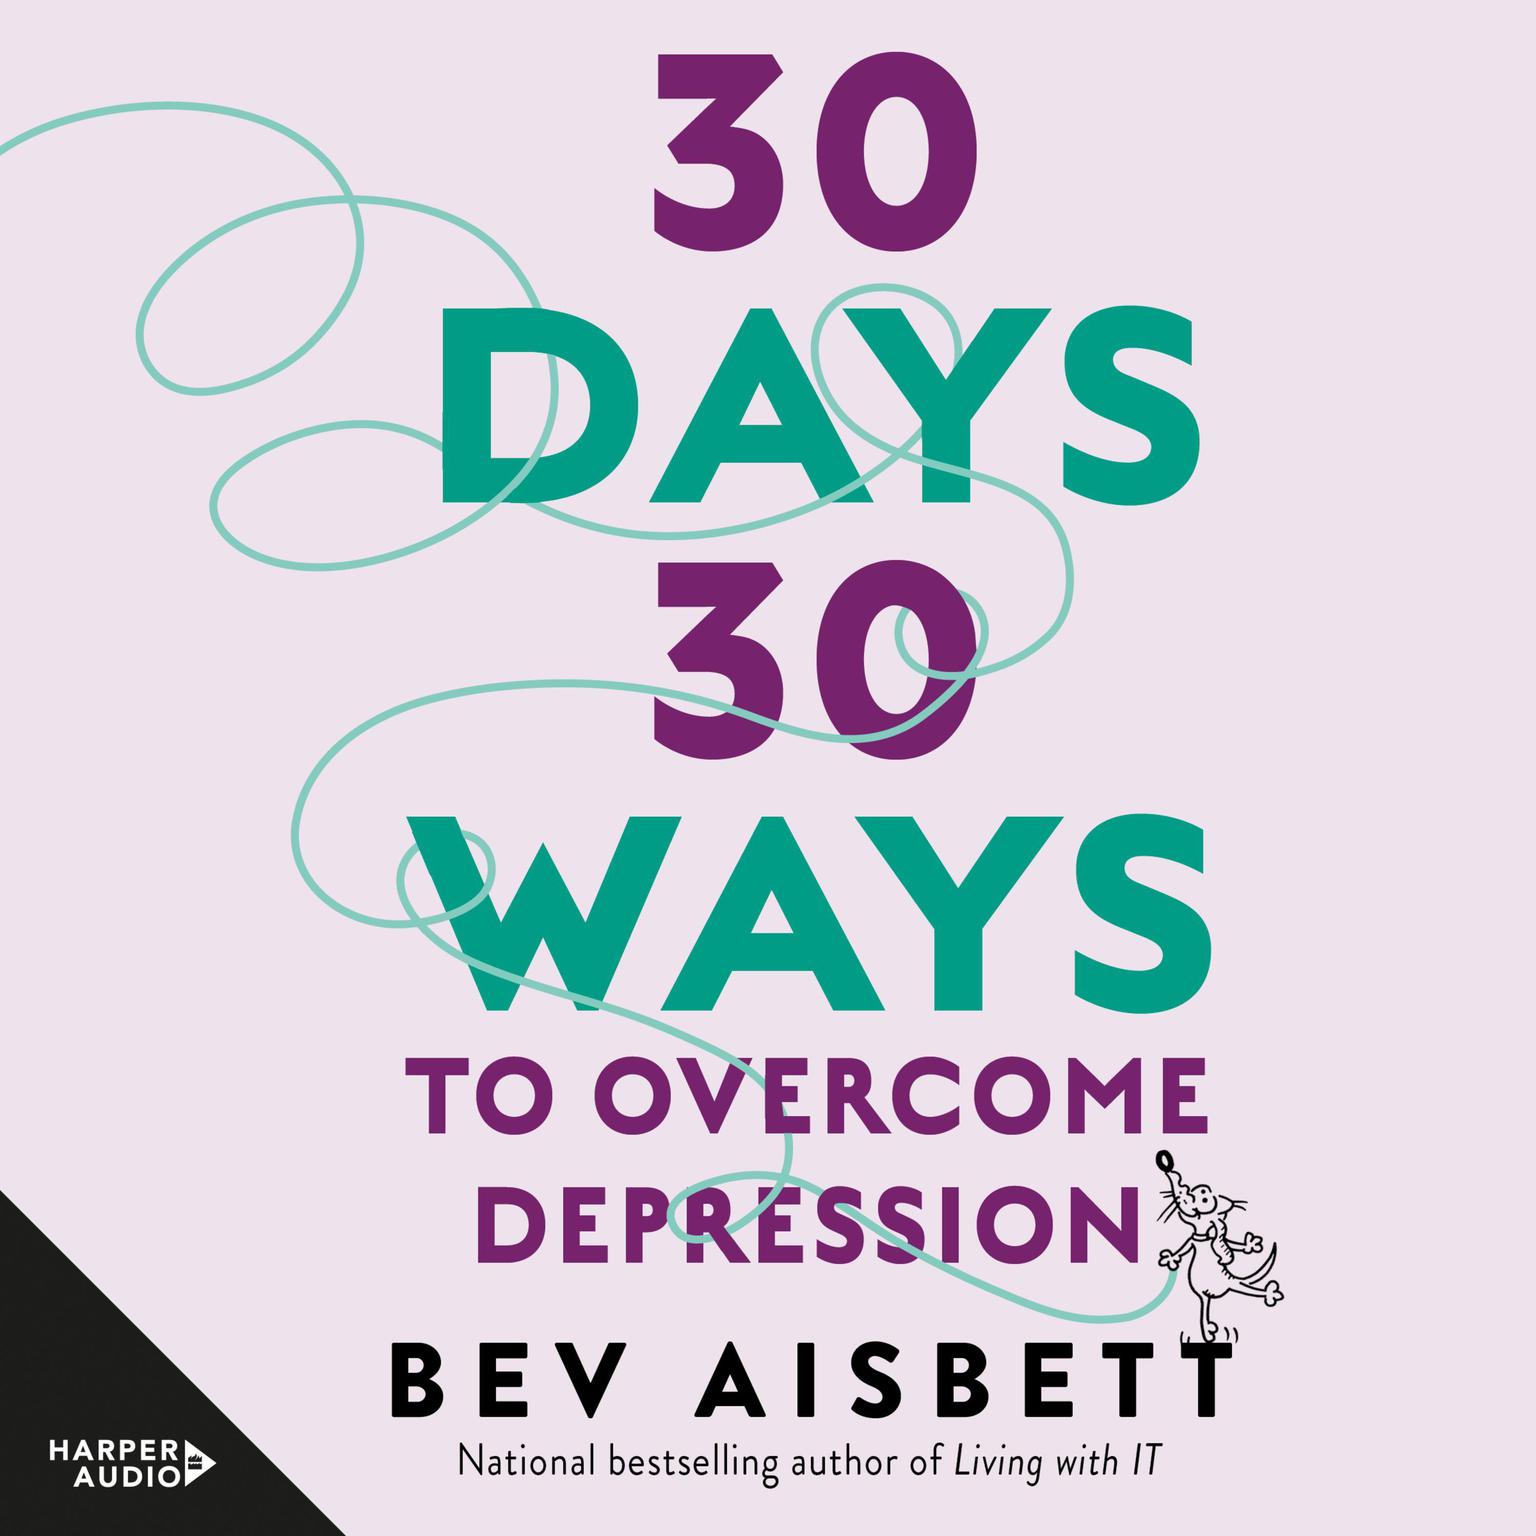 30 Days 30 Ways To Overcome Depression Audiobook, by Bev Aisbett